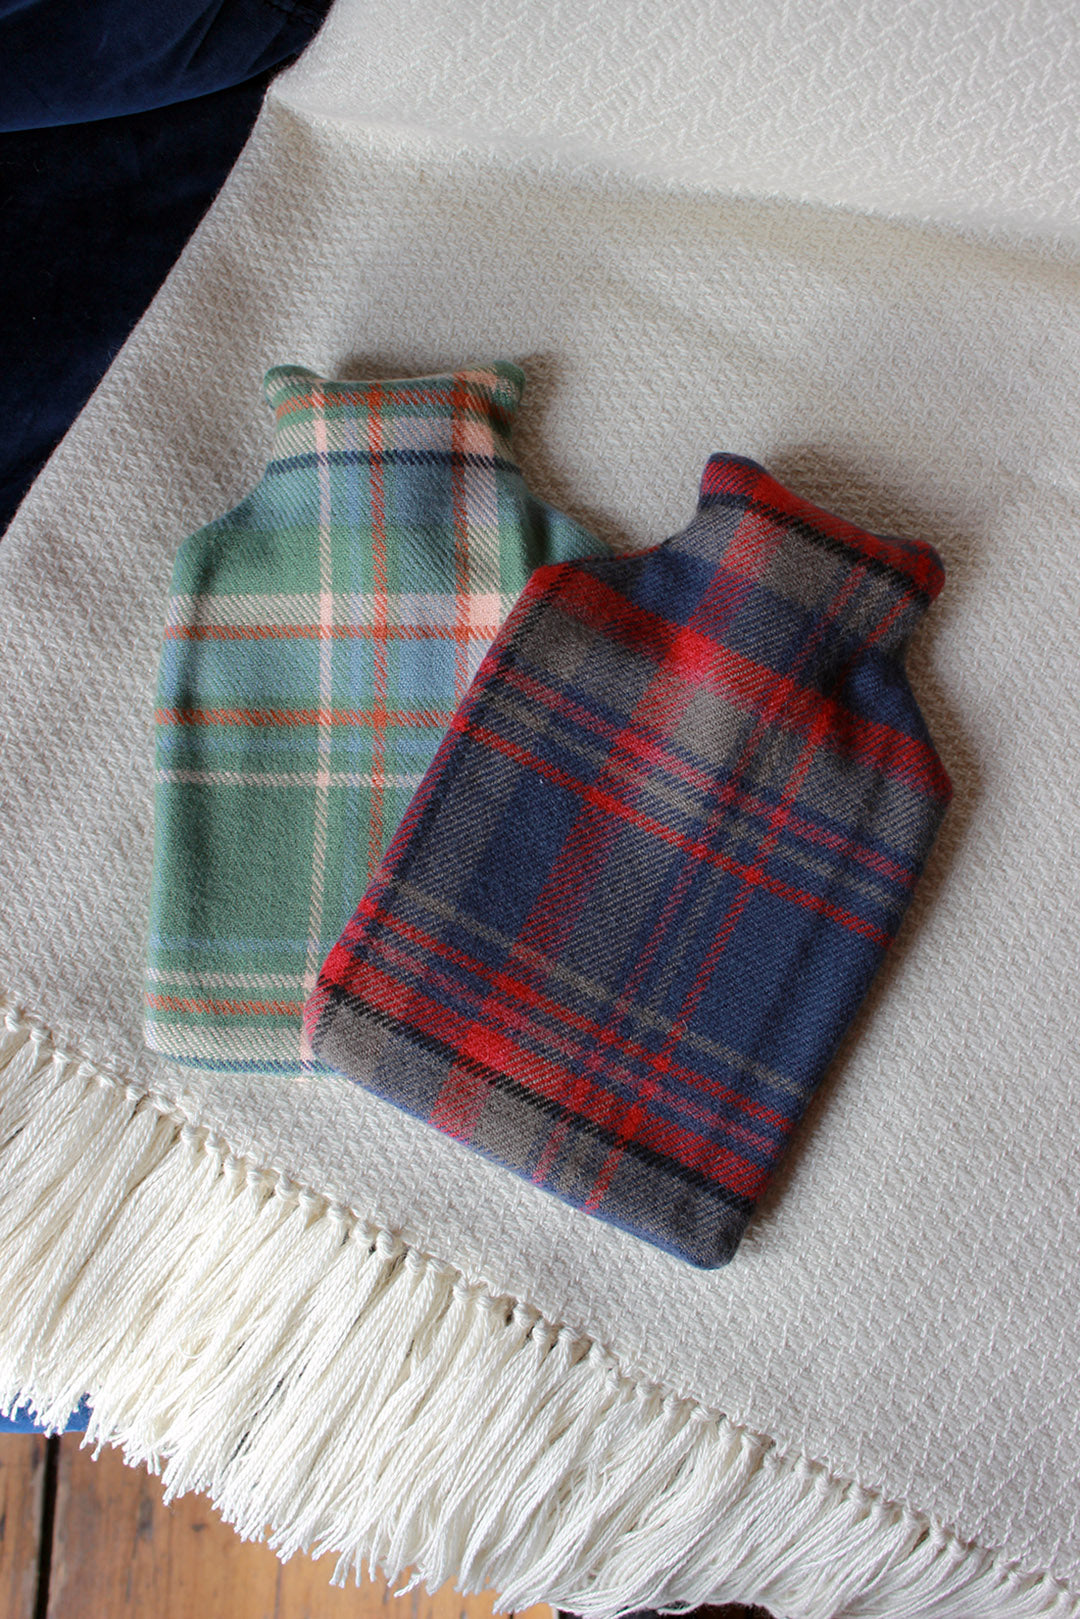 Snuggle up with our limited edition Araminta Campbell Highlands at Dusk tartan hot water bottle